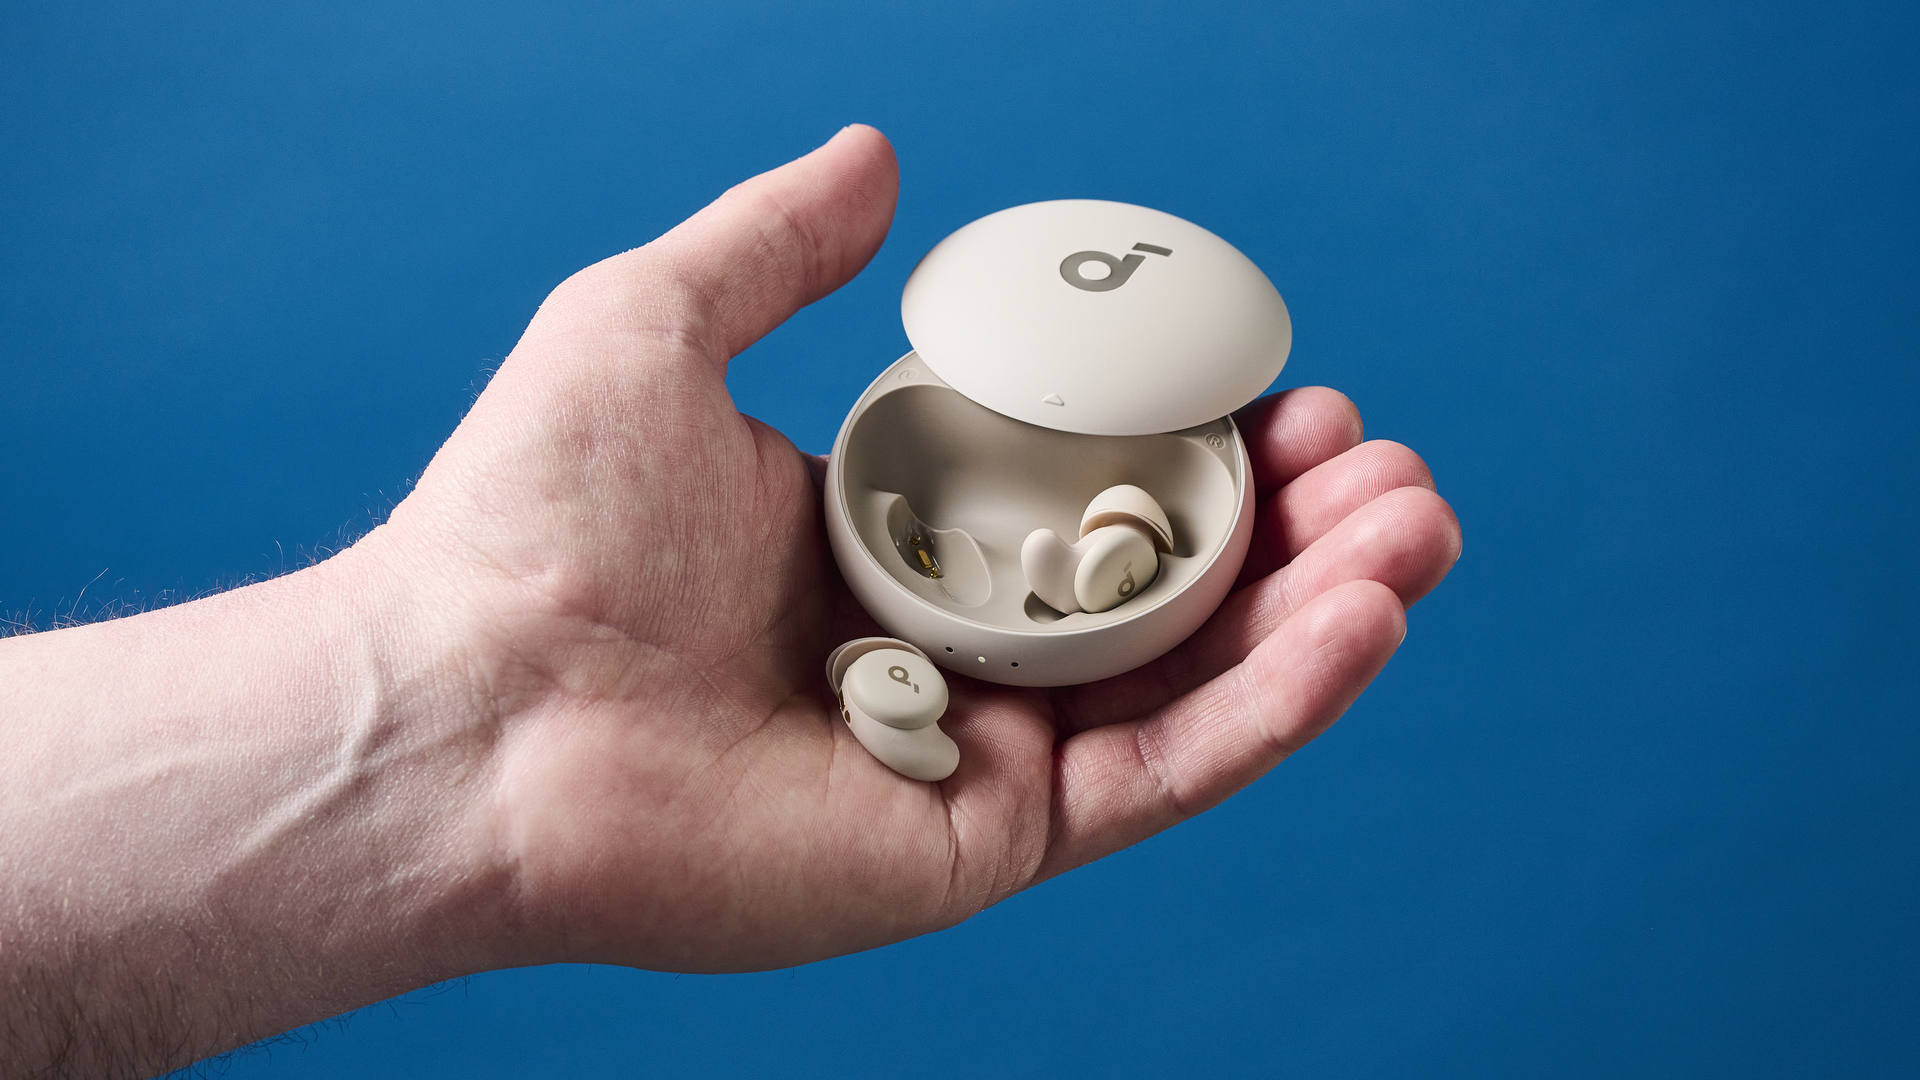 A photo of the Soundcore Sleep A20 earbuds in their open case being held in hand with a blue wall in the background.